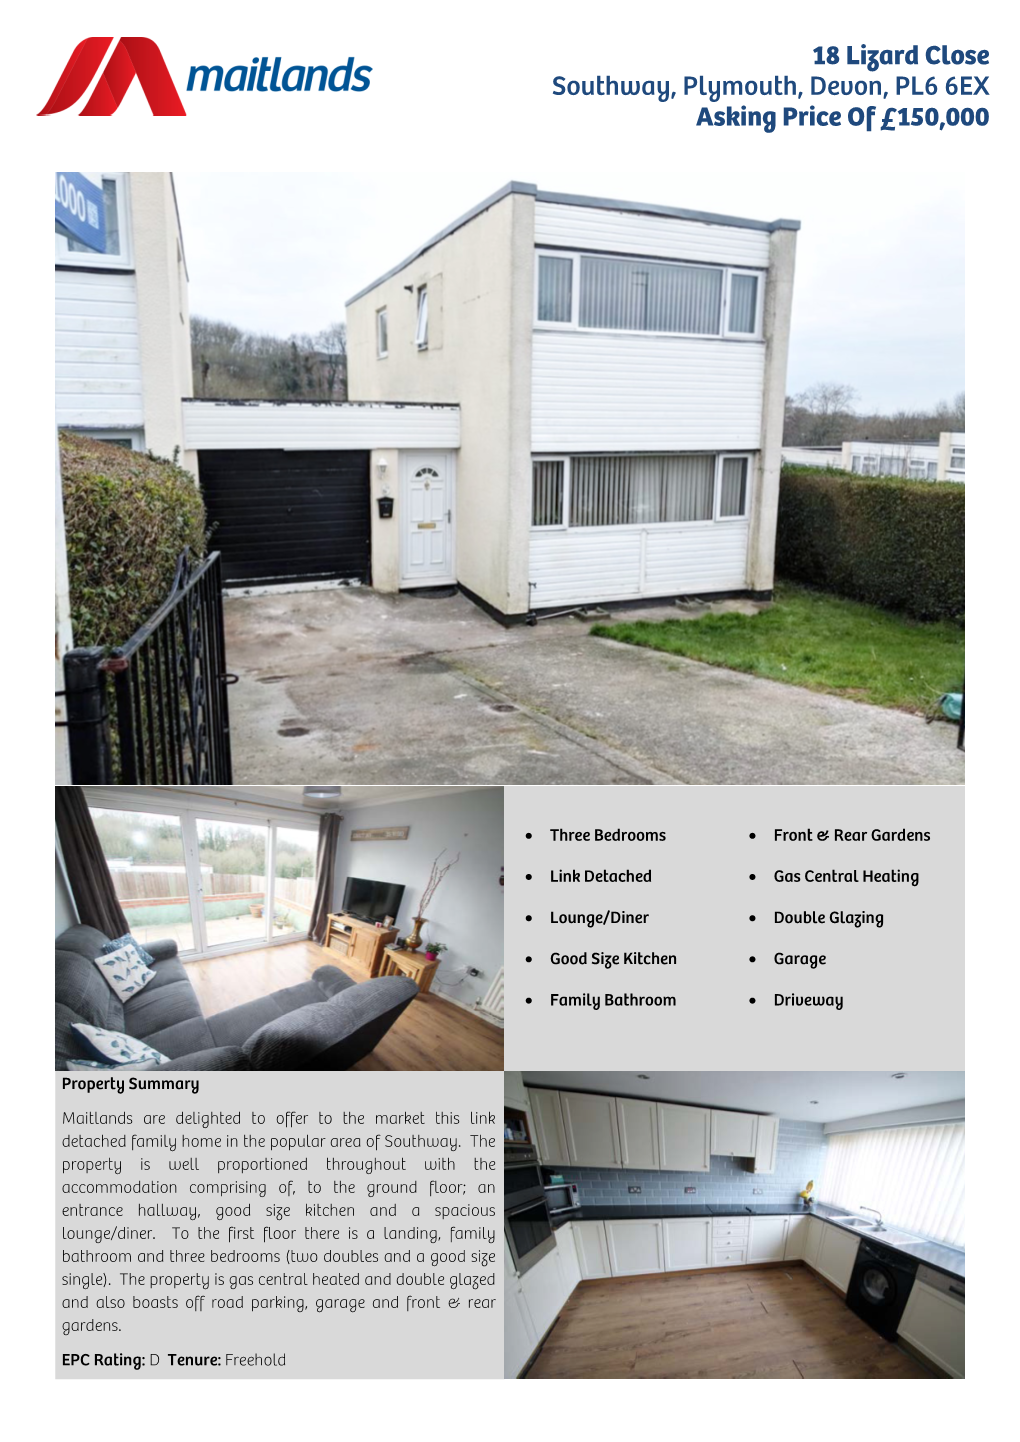 18 Lizard Close Southway, Plymouth, Devon, PL6 6EX Asking Price of £150,000